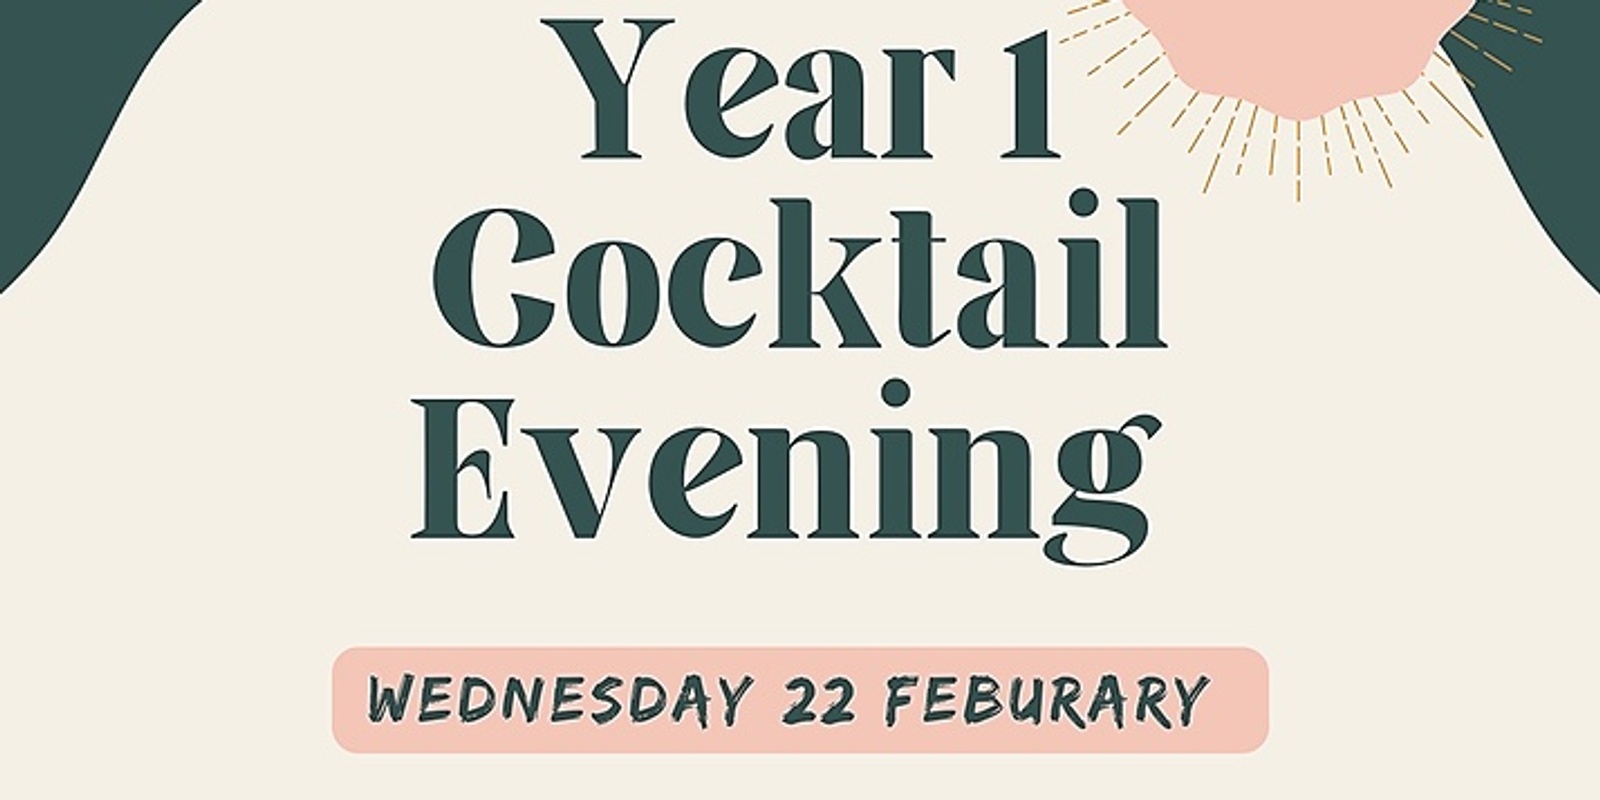 Banner image for Year 1 Cocktail Evening